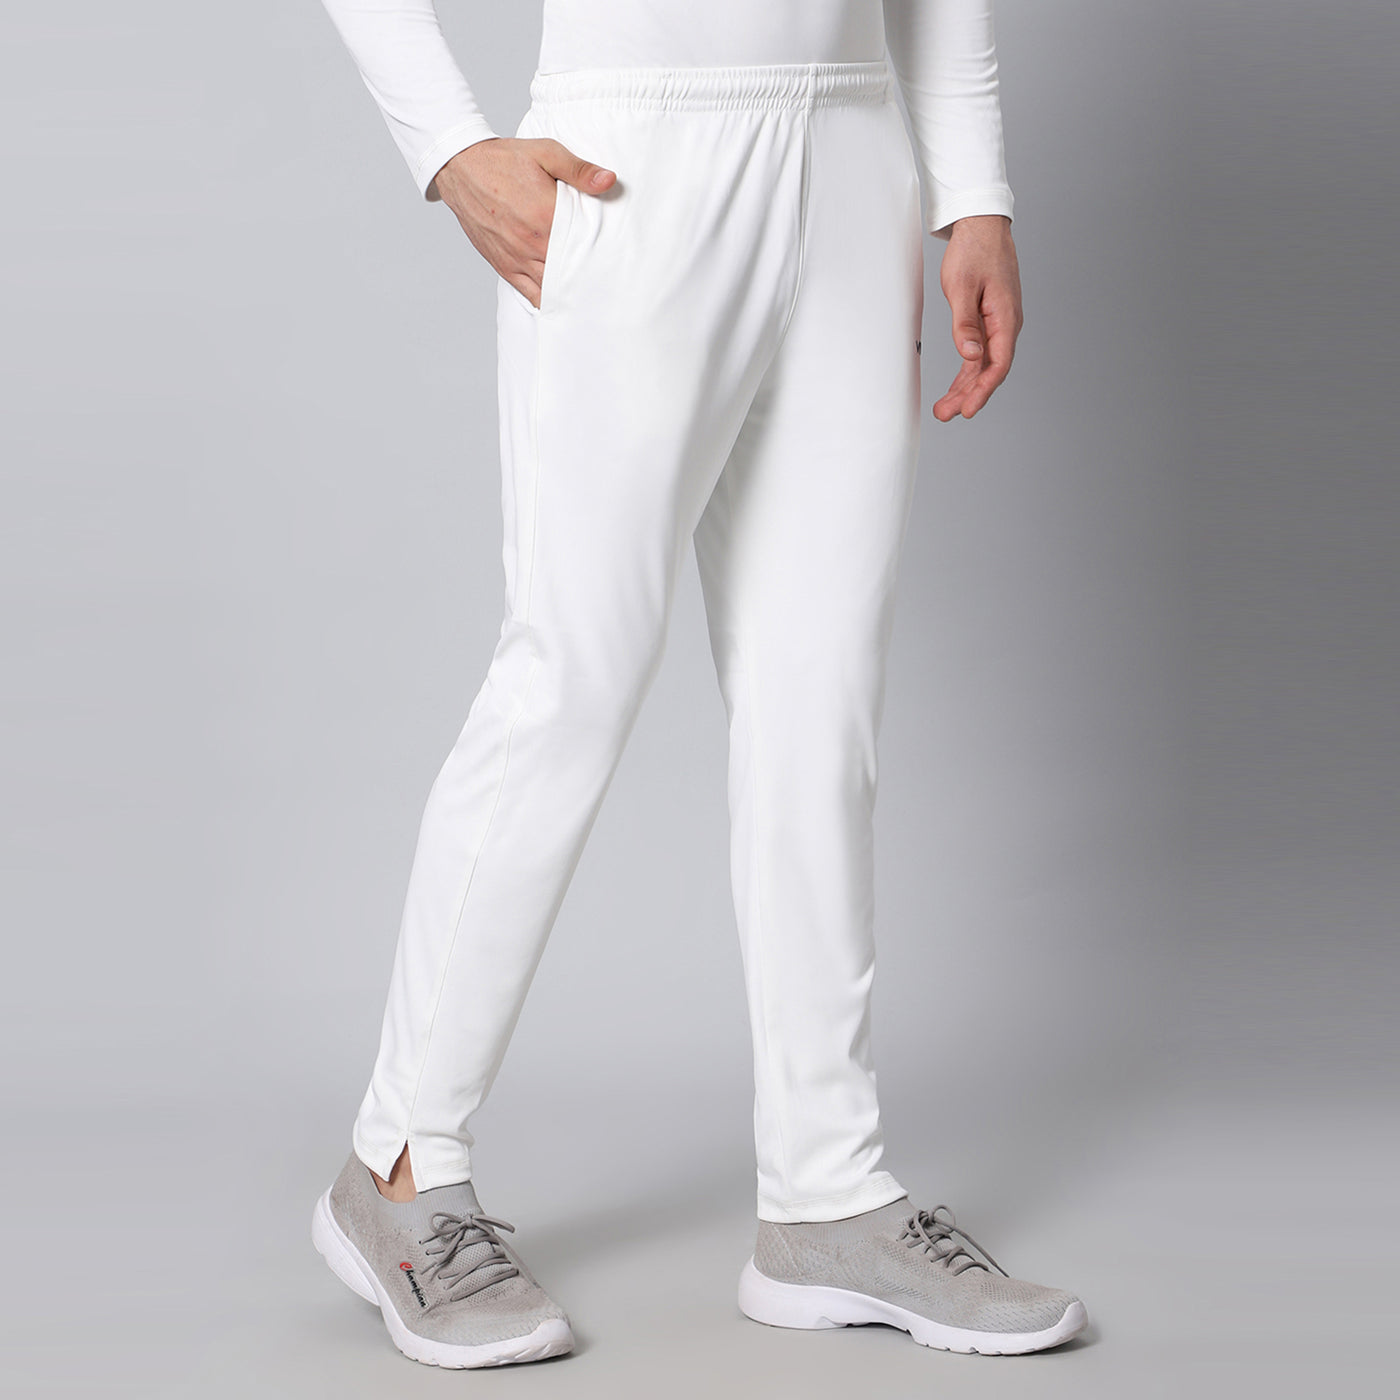 Upgrade Her Casual Style with Girls Casual Track Pants